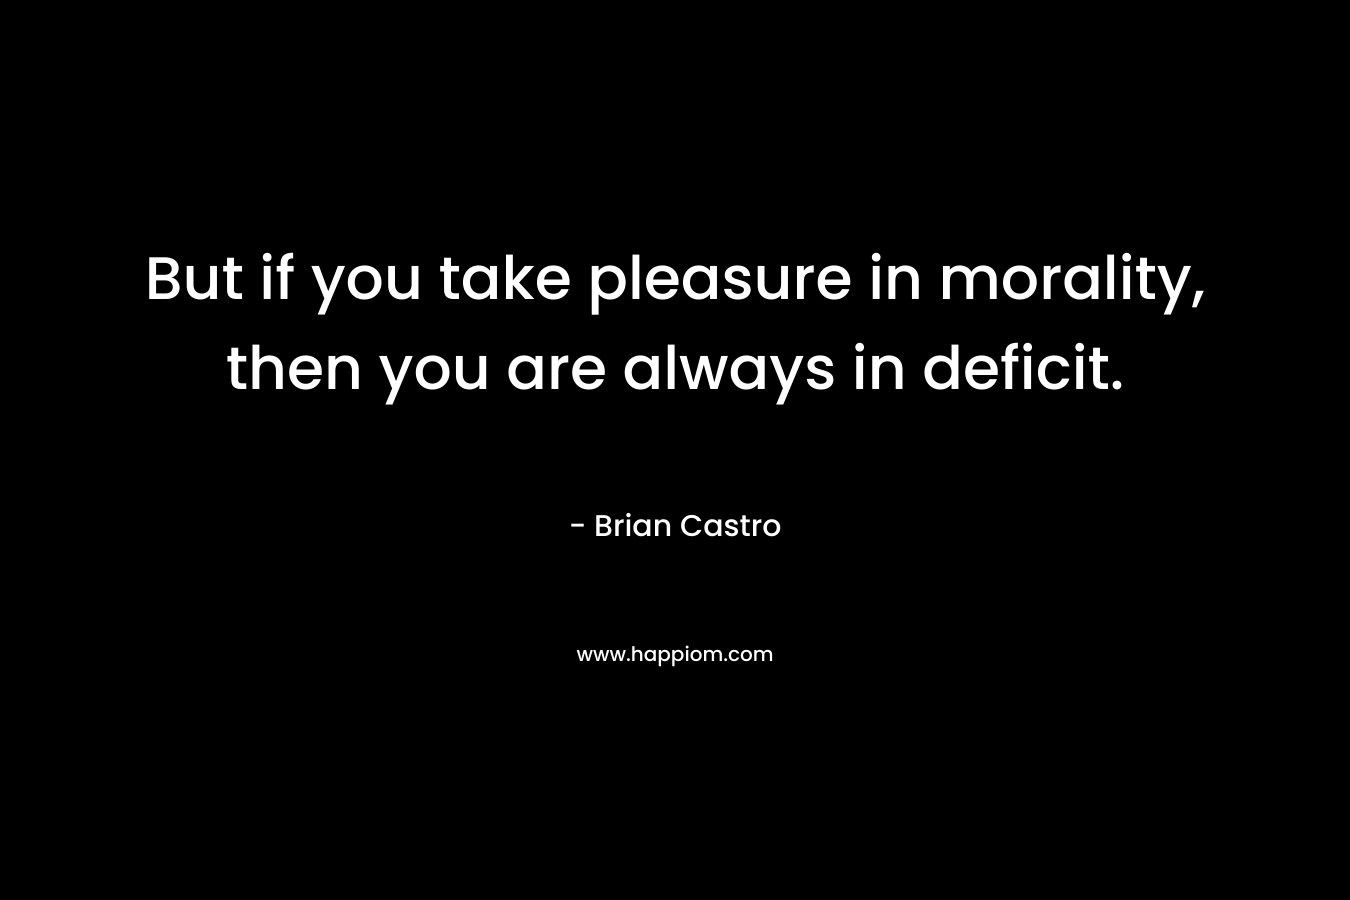 But if you take pleasure in morality, then you are always in deficit. – Brian Castro